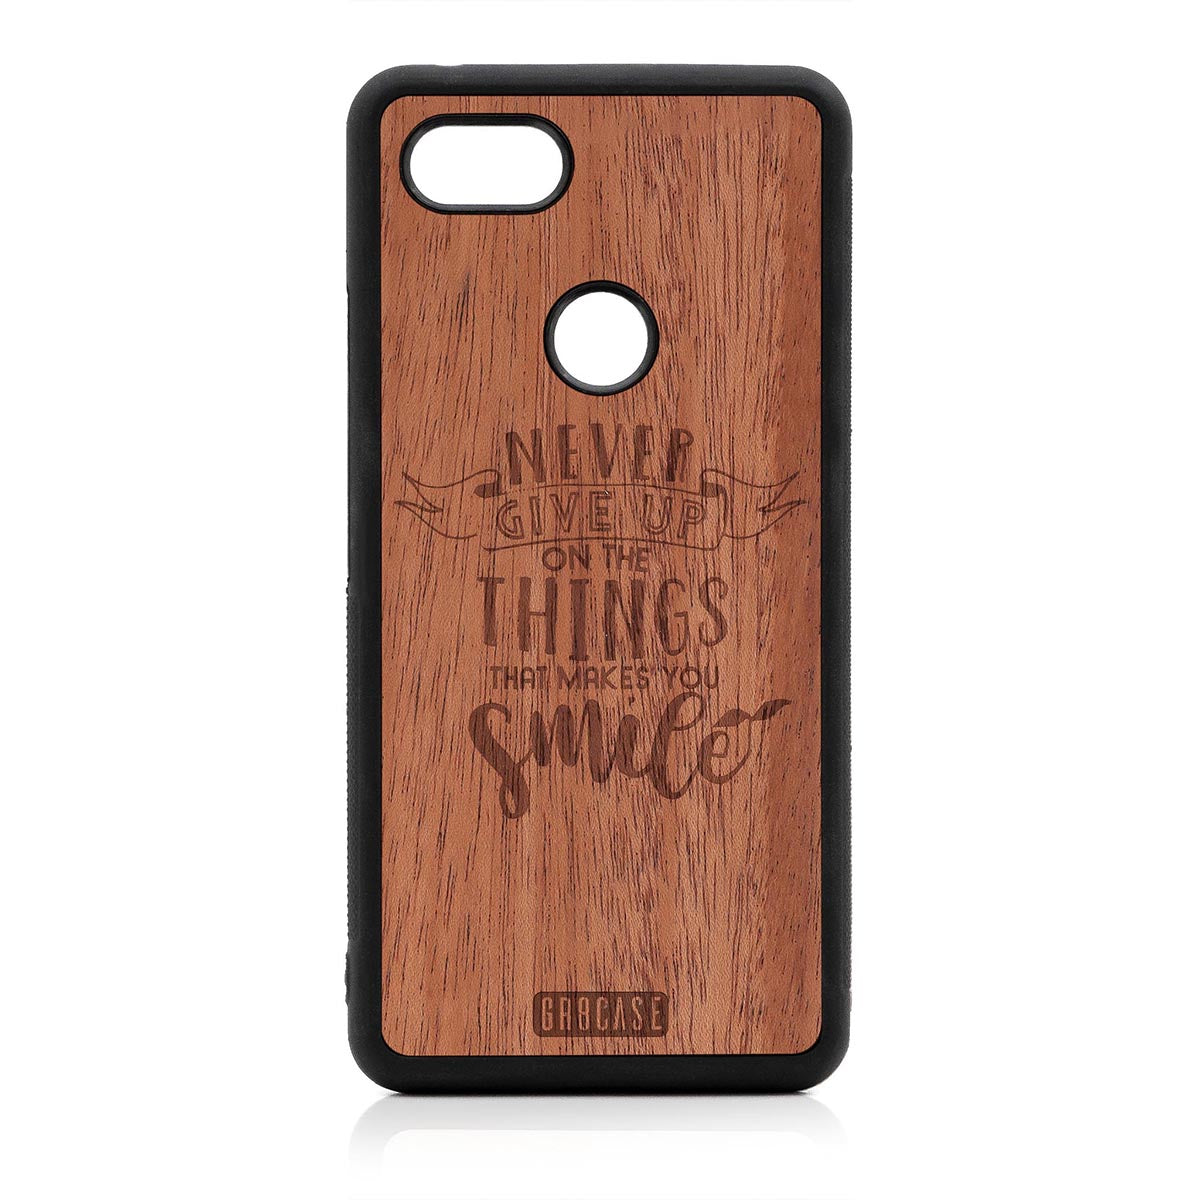 Never Give Up On The Things That Makes You Smile Design Wood Case Google Pixel 3 XL by GR8CASE